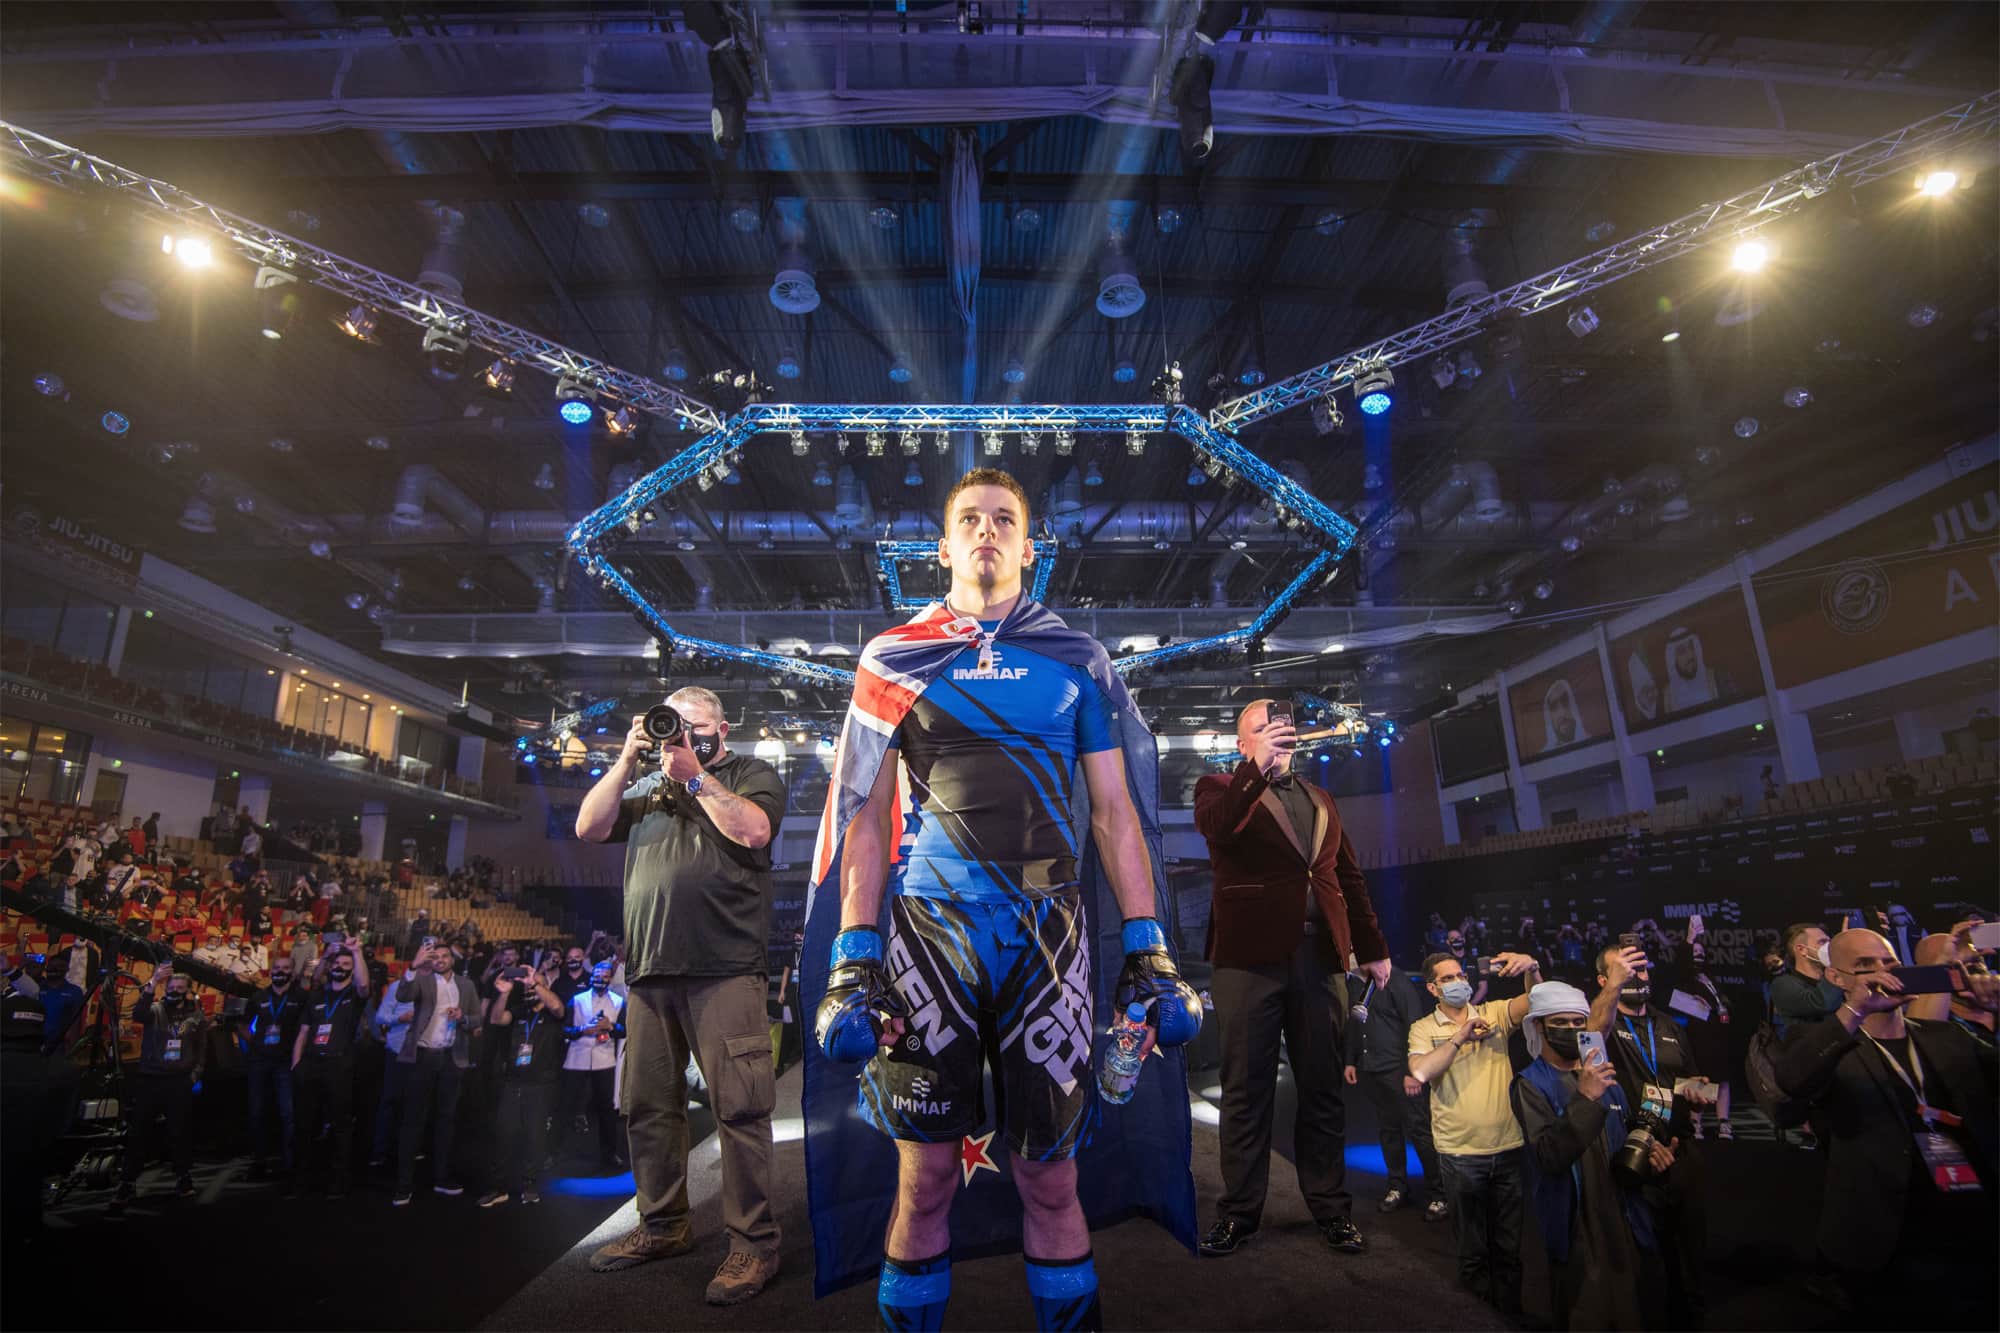 2021 Middleweight World Champion Fergus Jenkins describes his first IMMAF event as “life-changing”